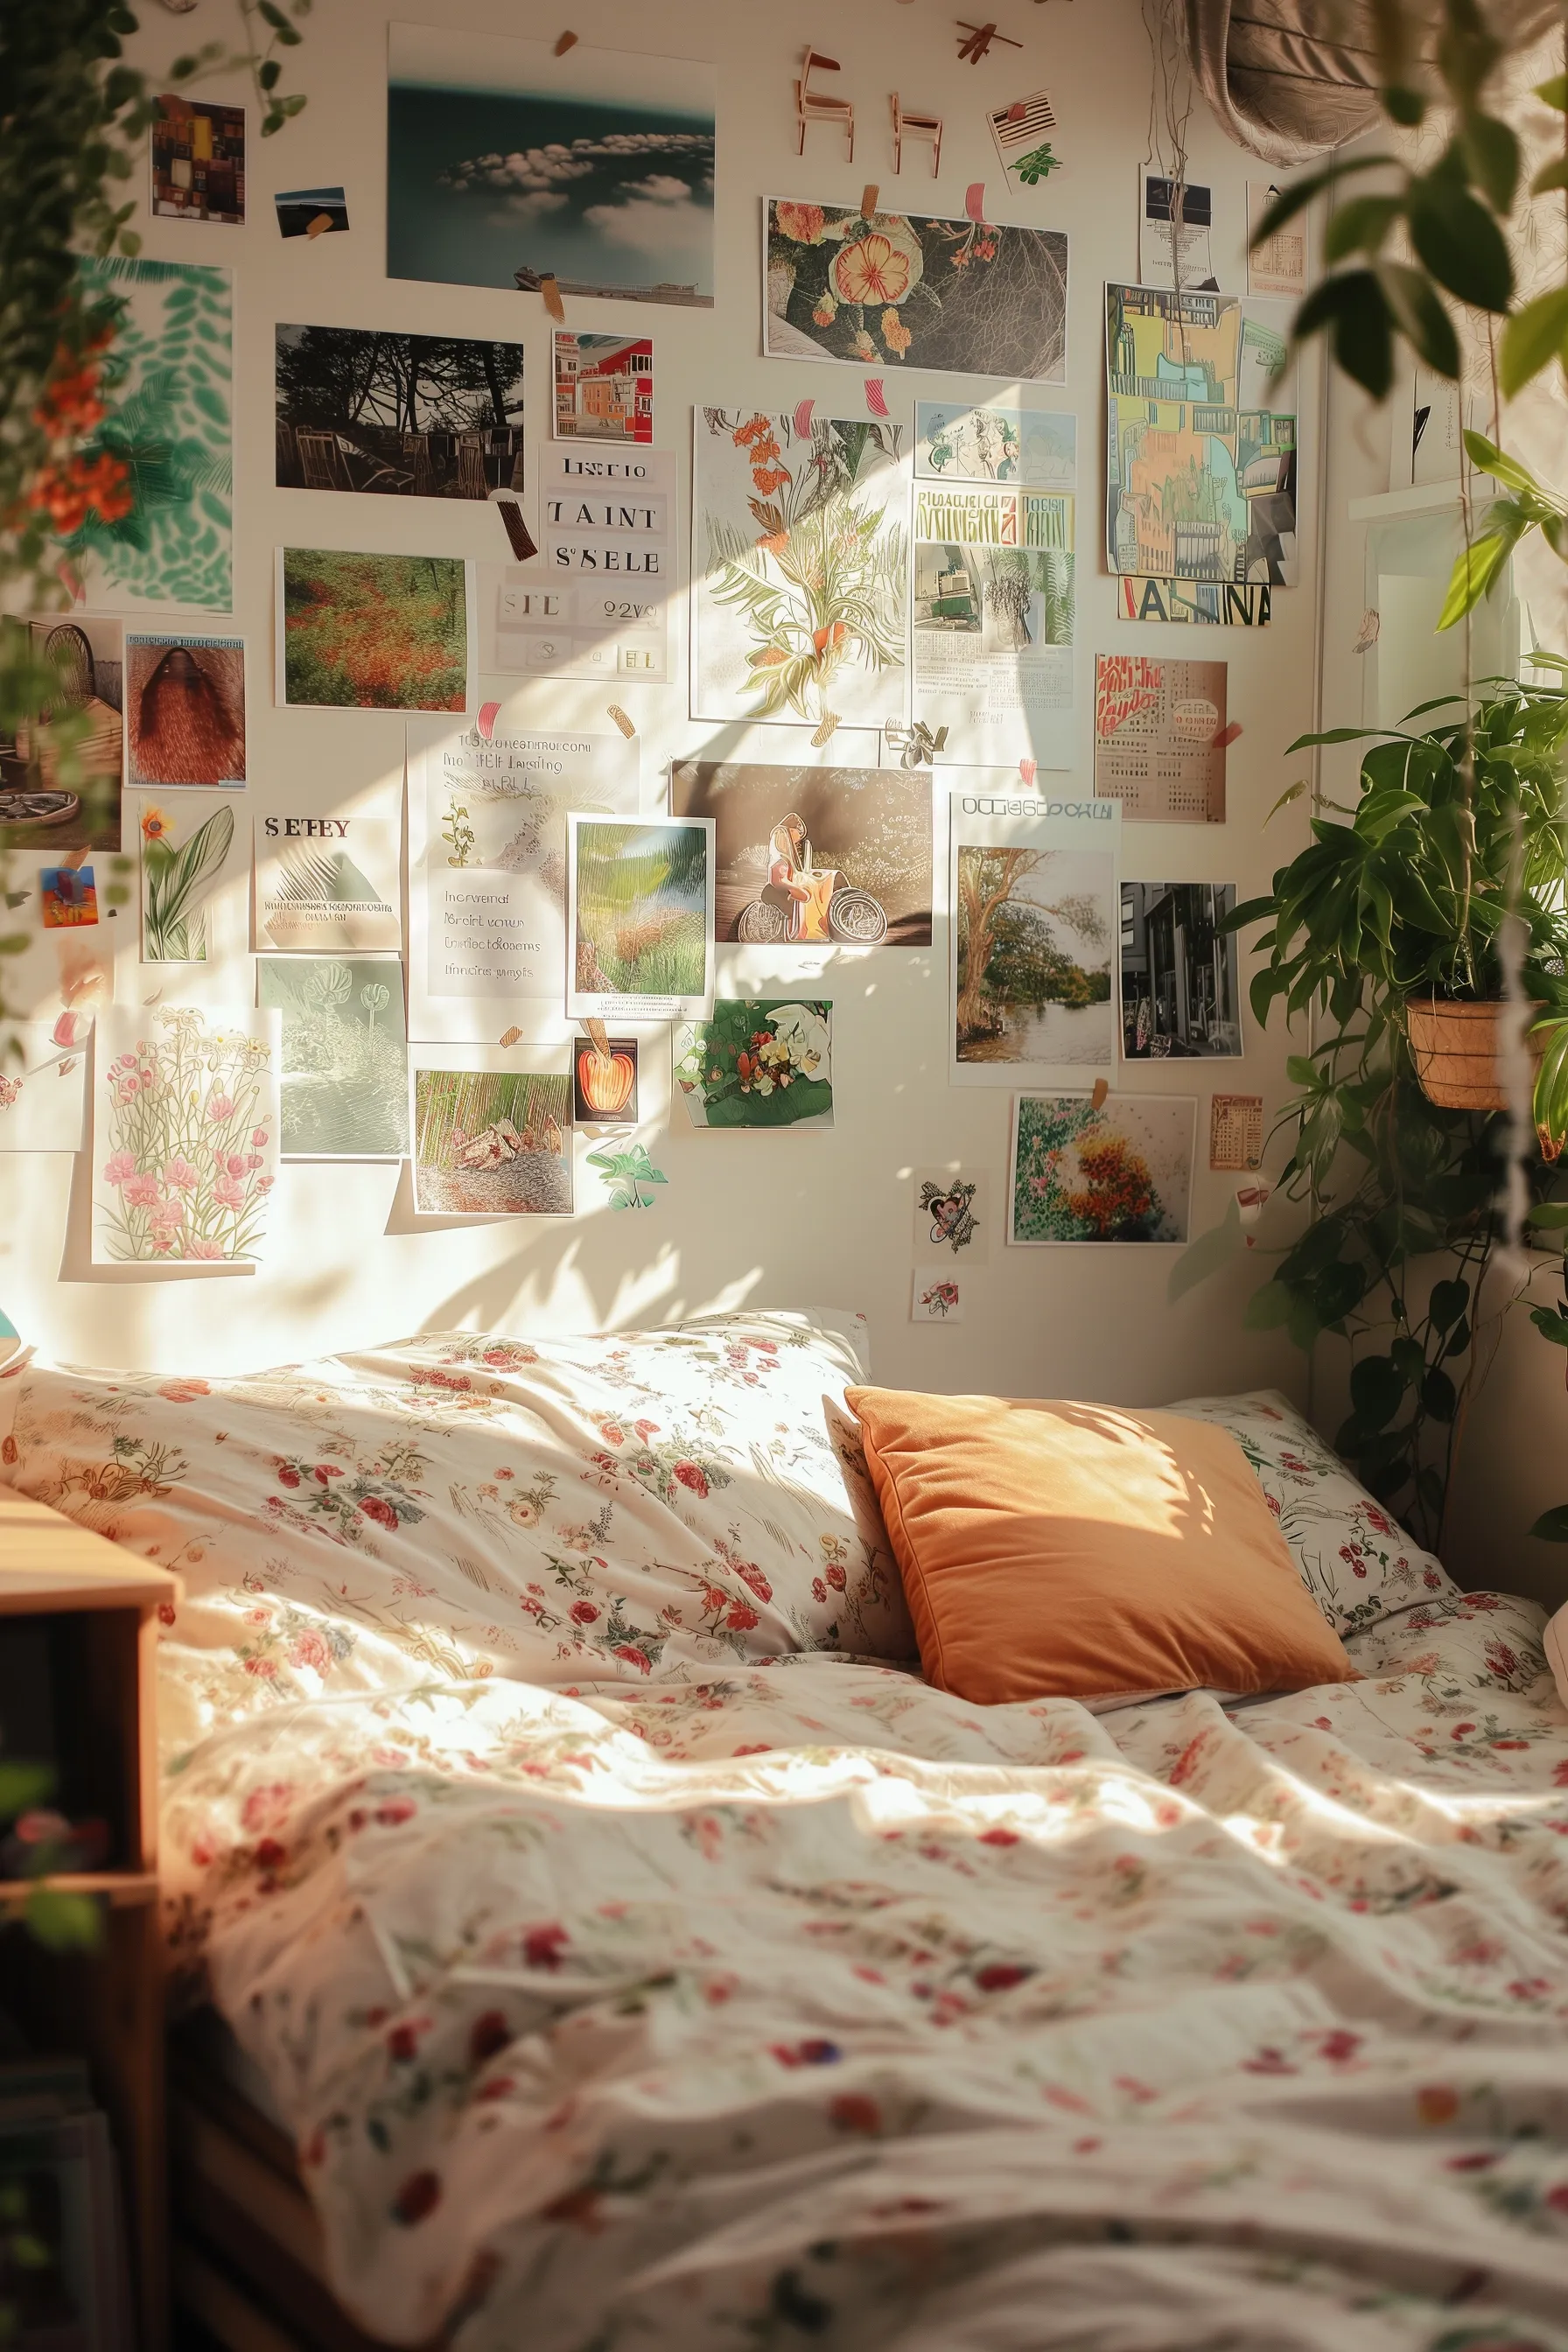 A bedroom with plants, wall art, and washy tape.